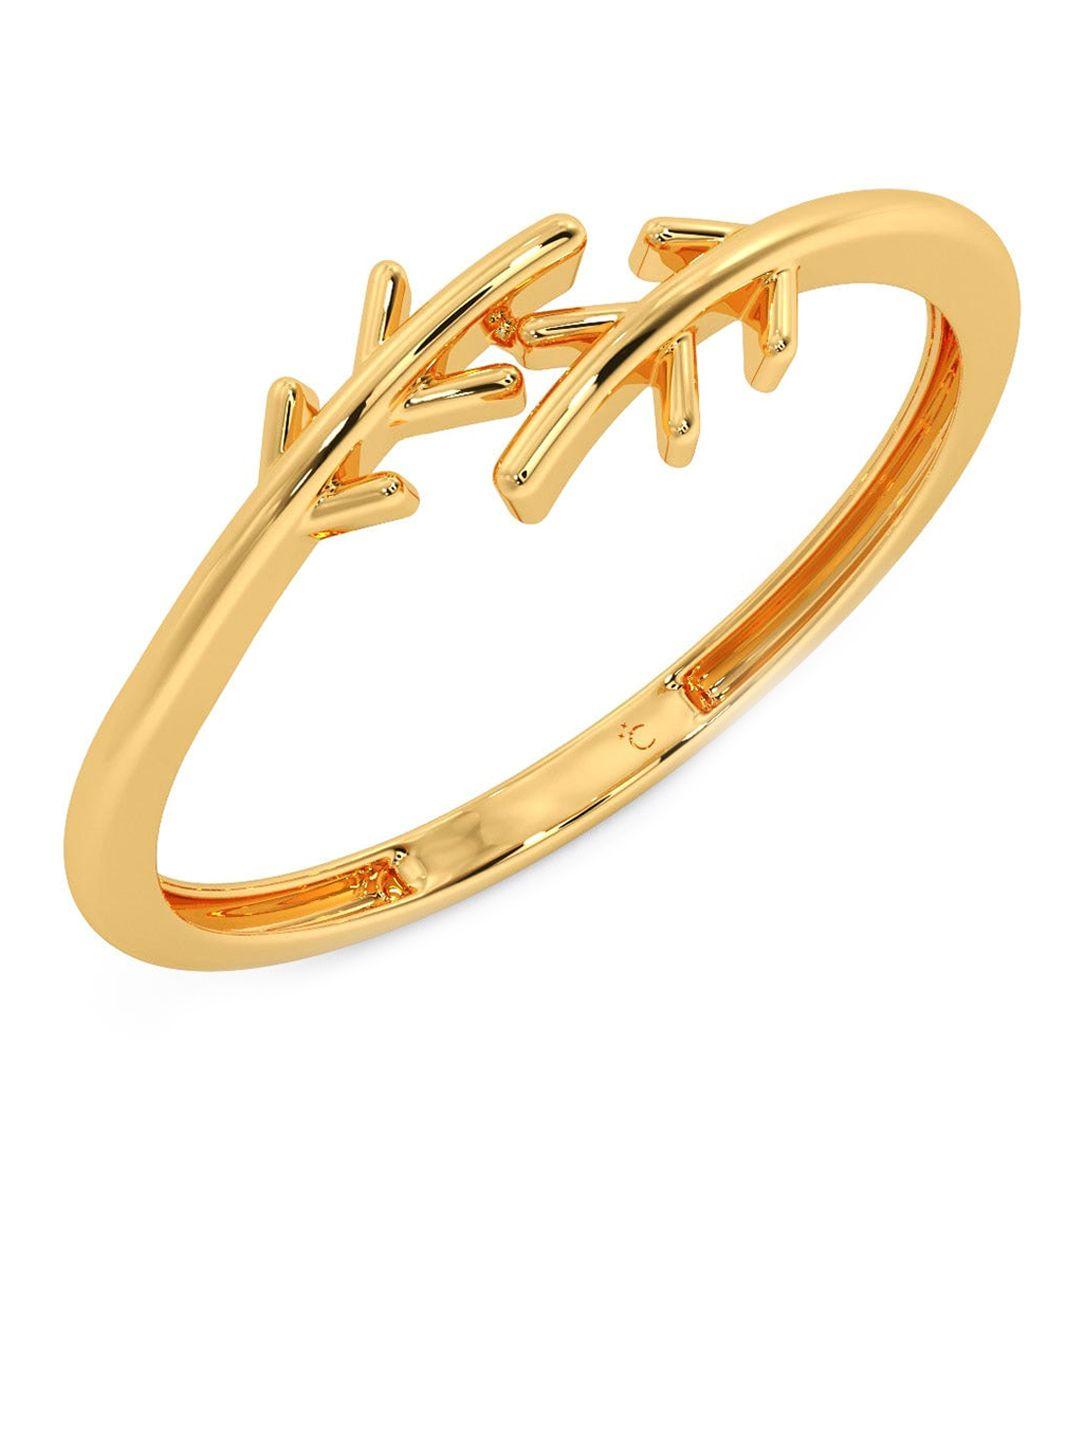 candere-a-kalyan-jewellers-company-18kt-gold-ring-0.95gm